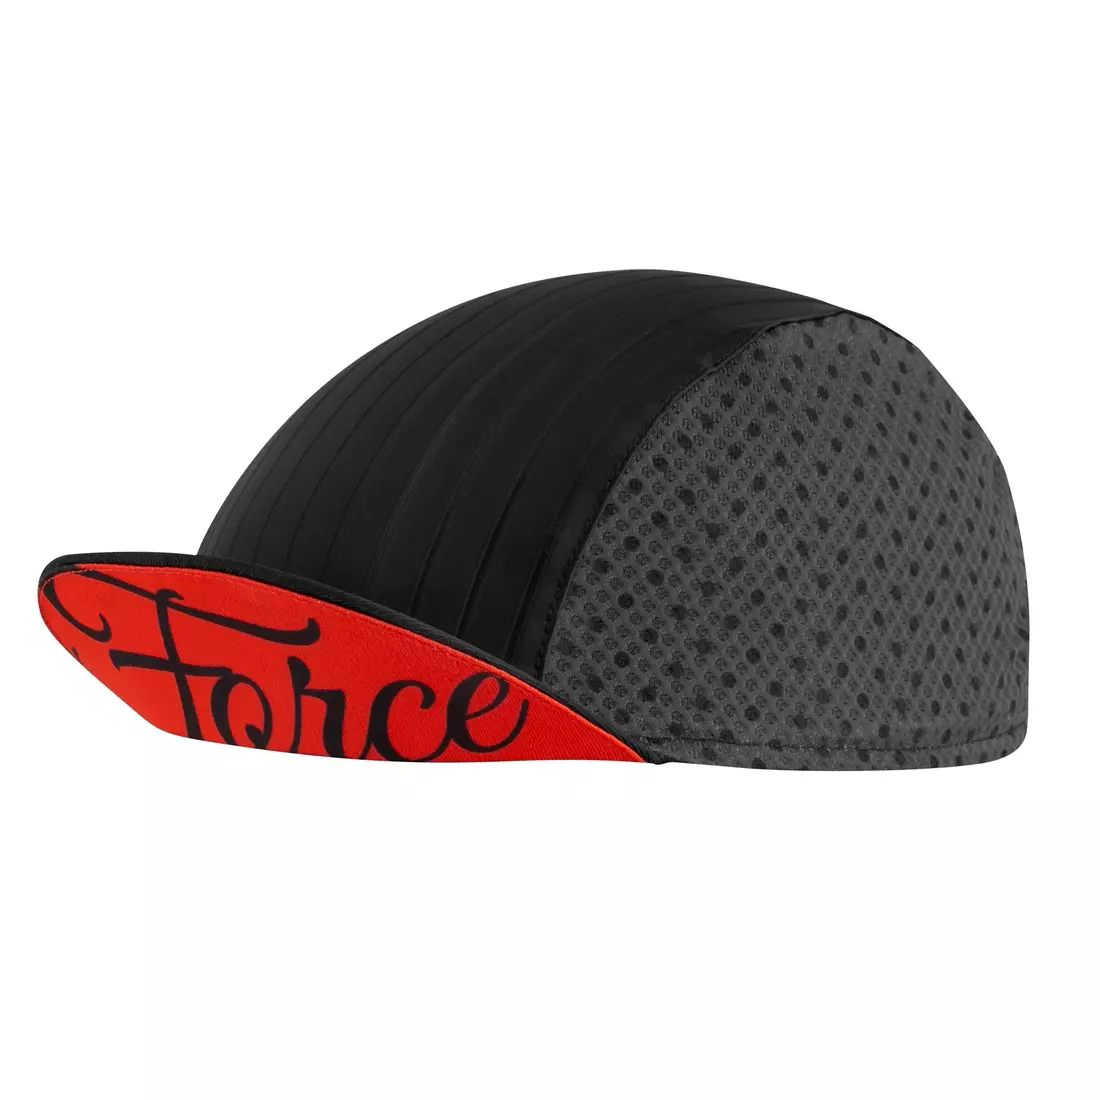 FORCE Cycling cap with a visor POINTS, black and gray, 903023